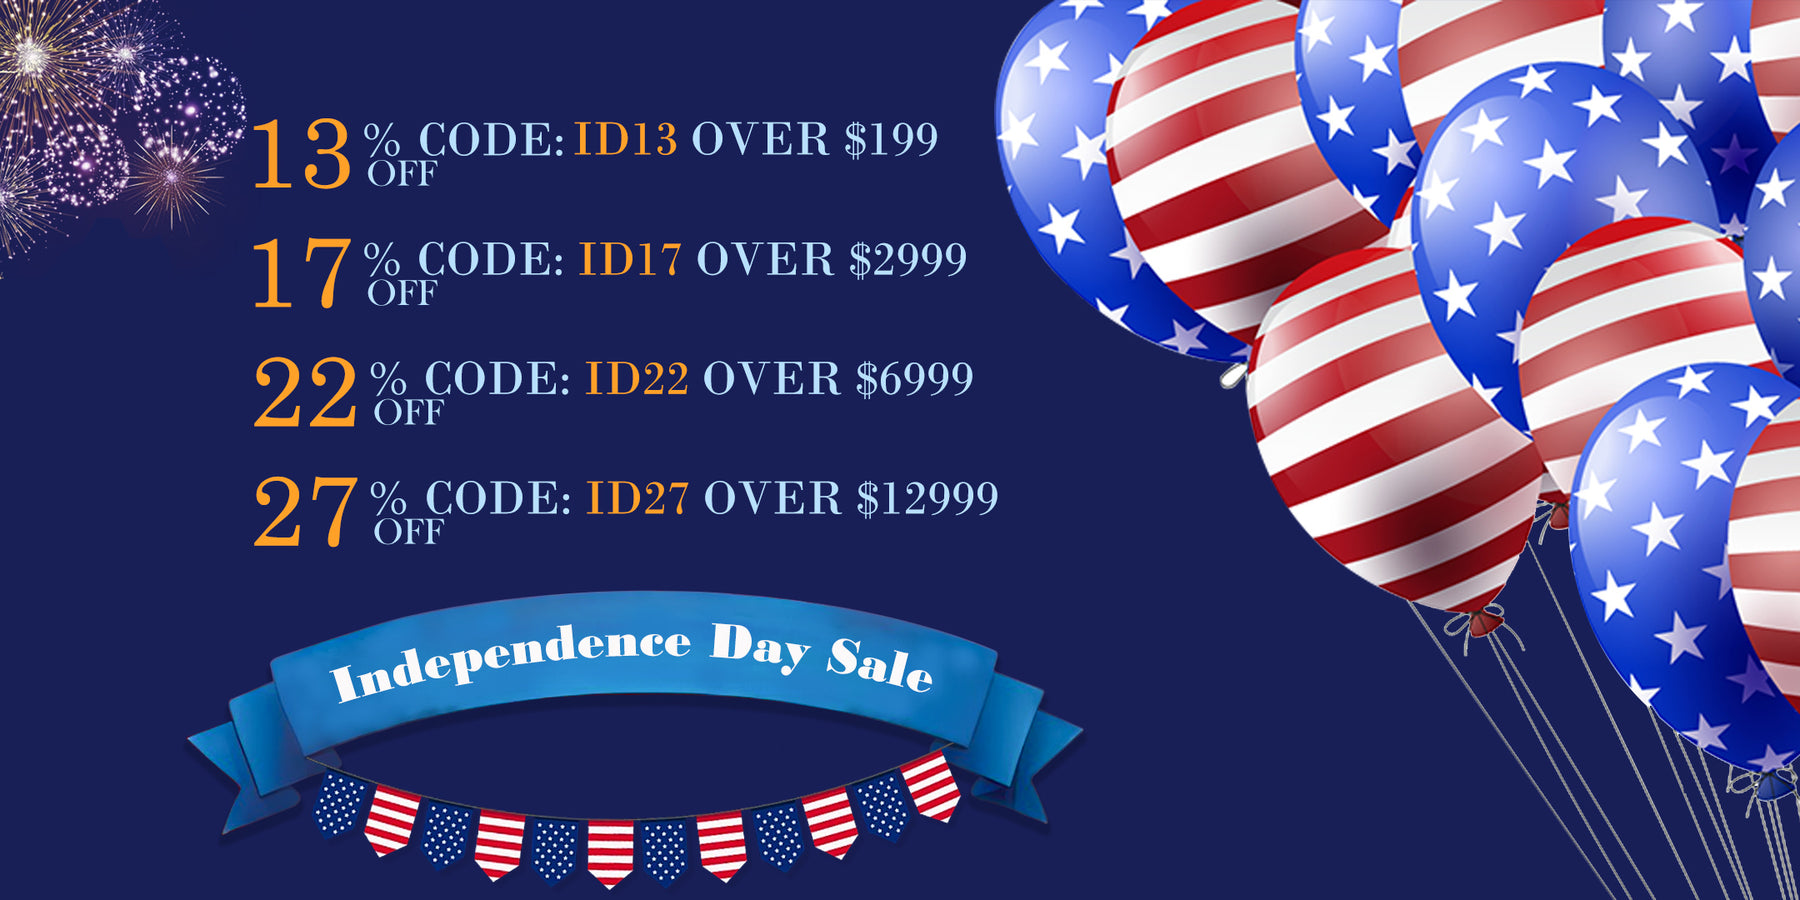 Merlinlamps Independence Day Sale